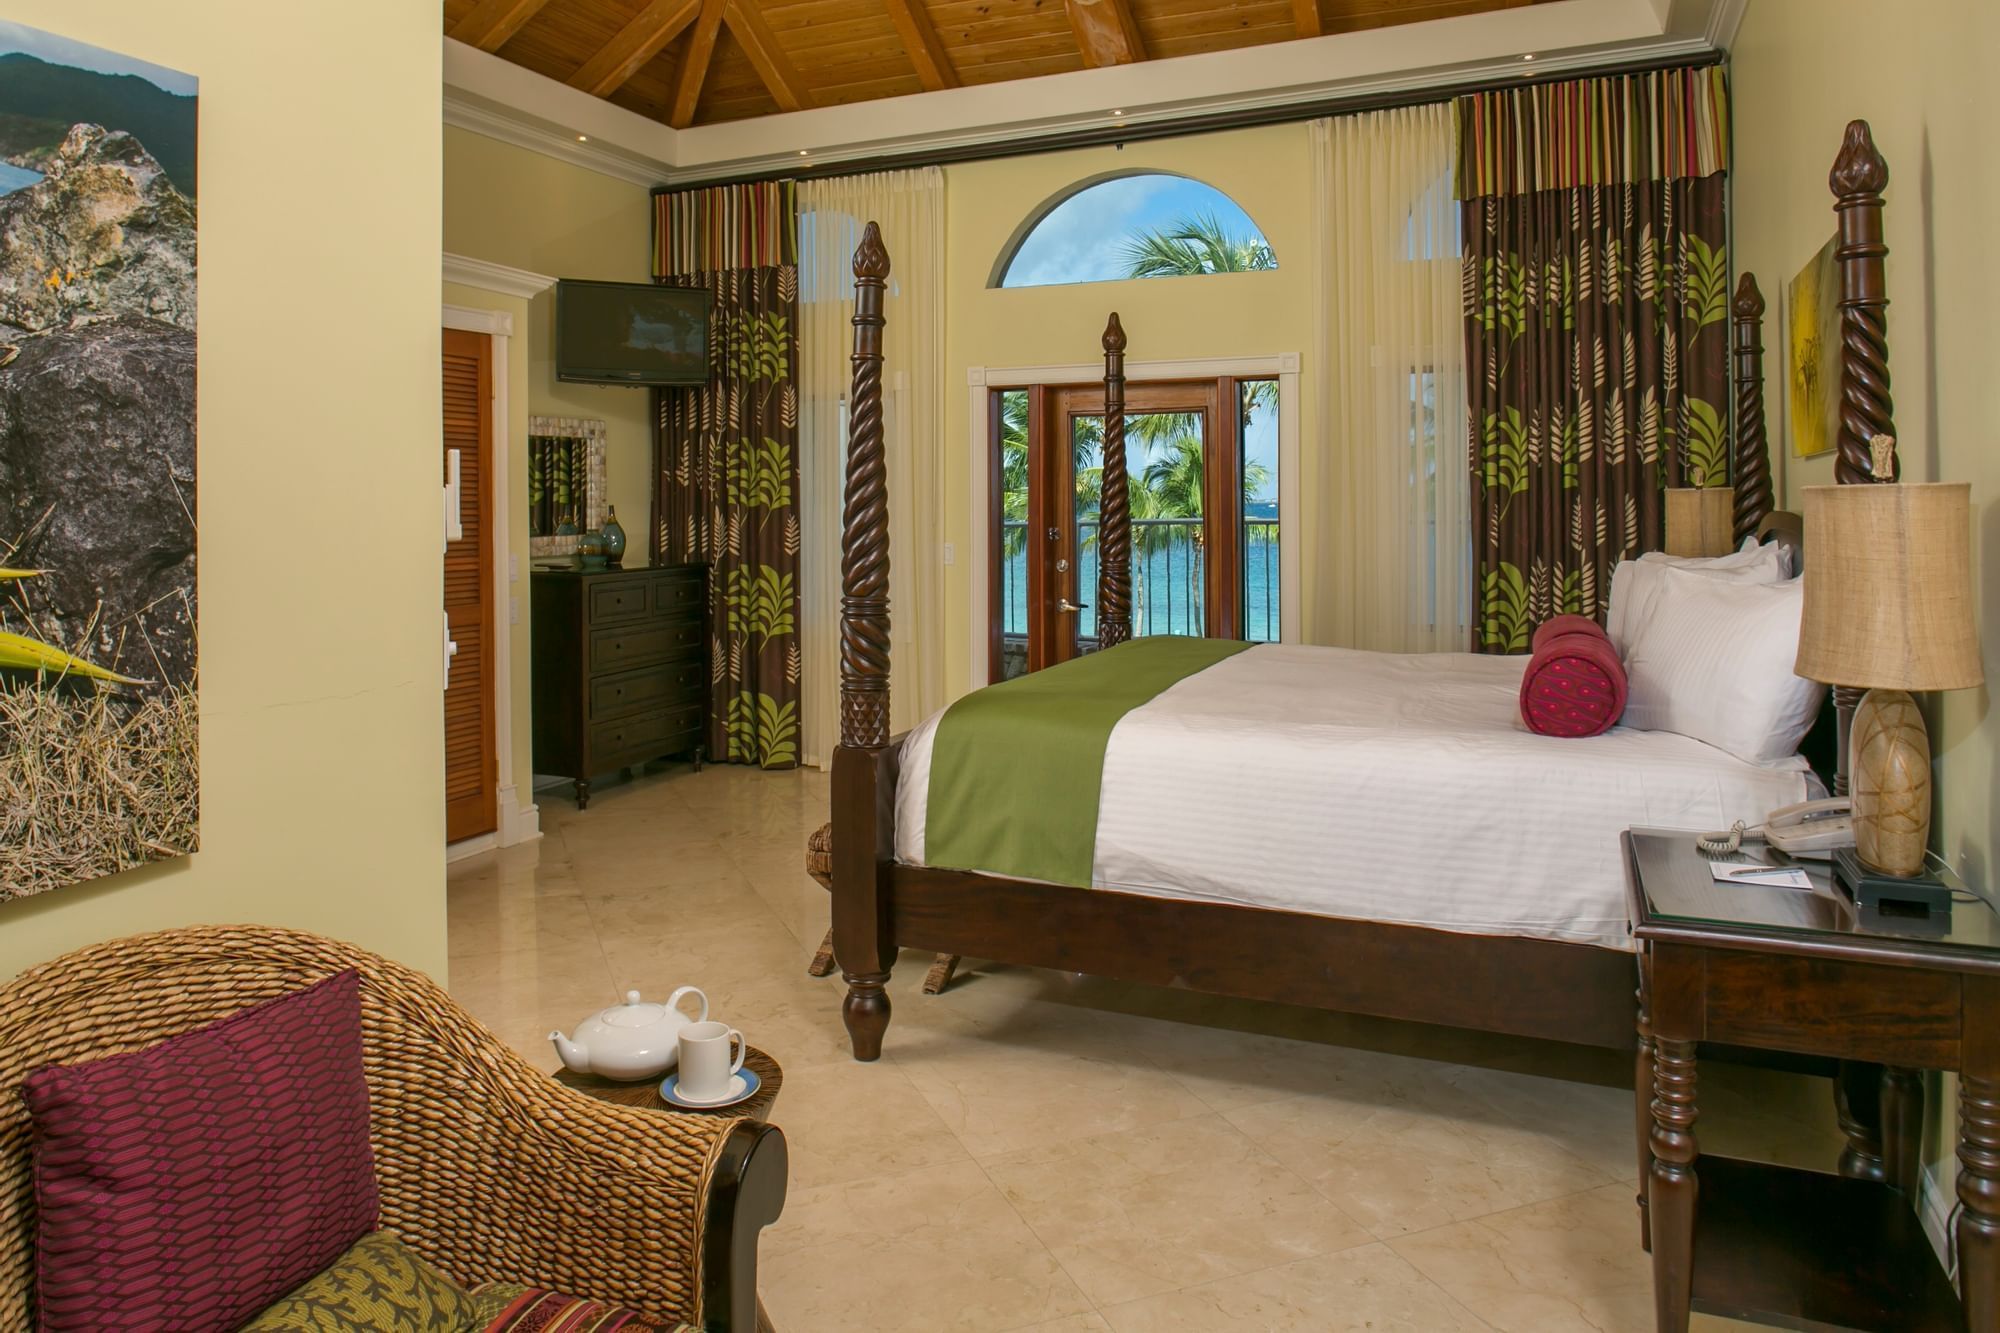 Comfy bed & lounge area in Ficus Suite at The Buccaneer Resort St. Croix